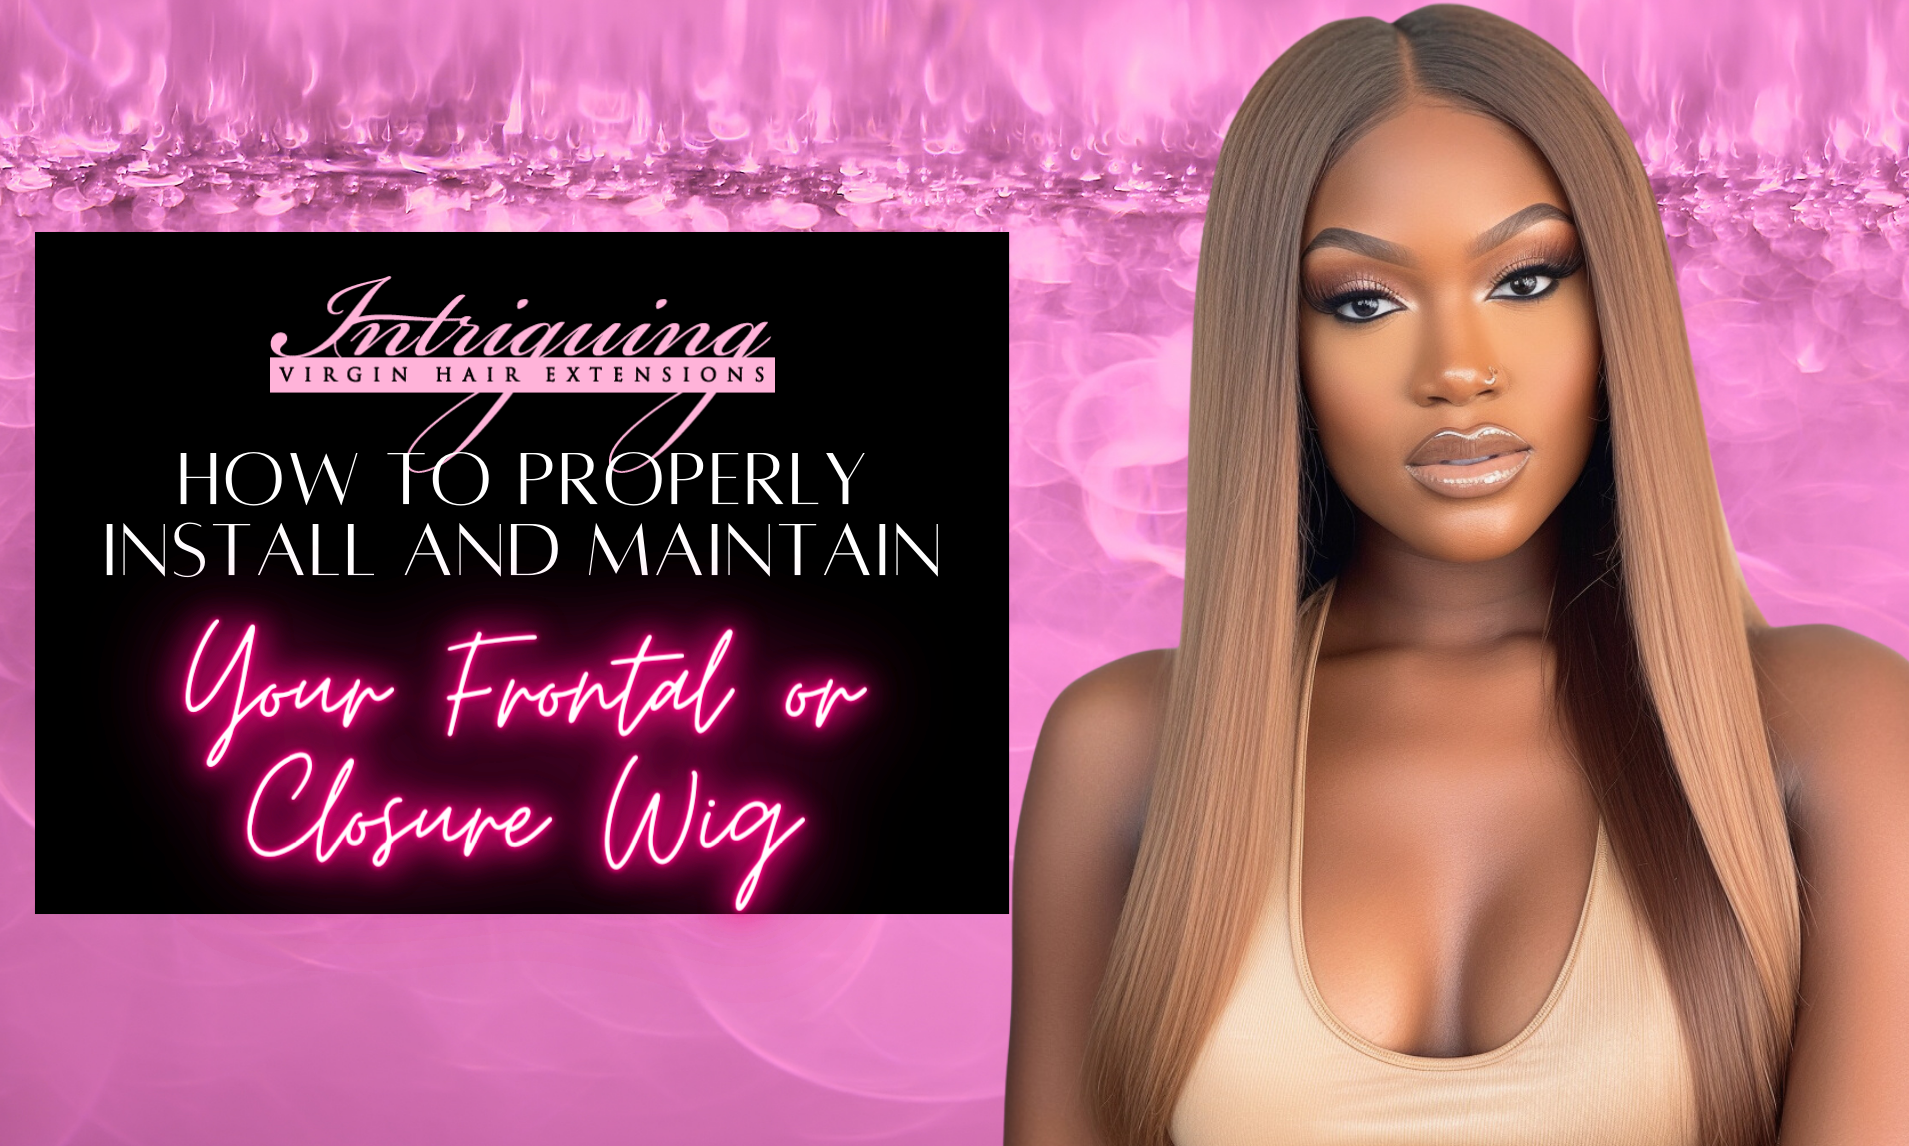 How to Properly Install and Maintain Your Frontal or Closure Wig